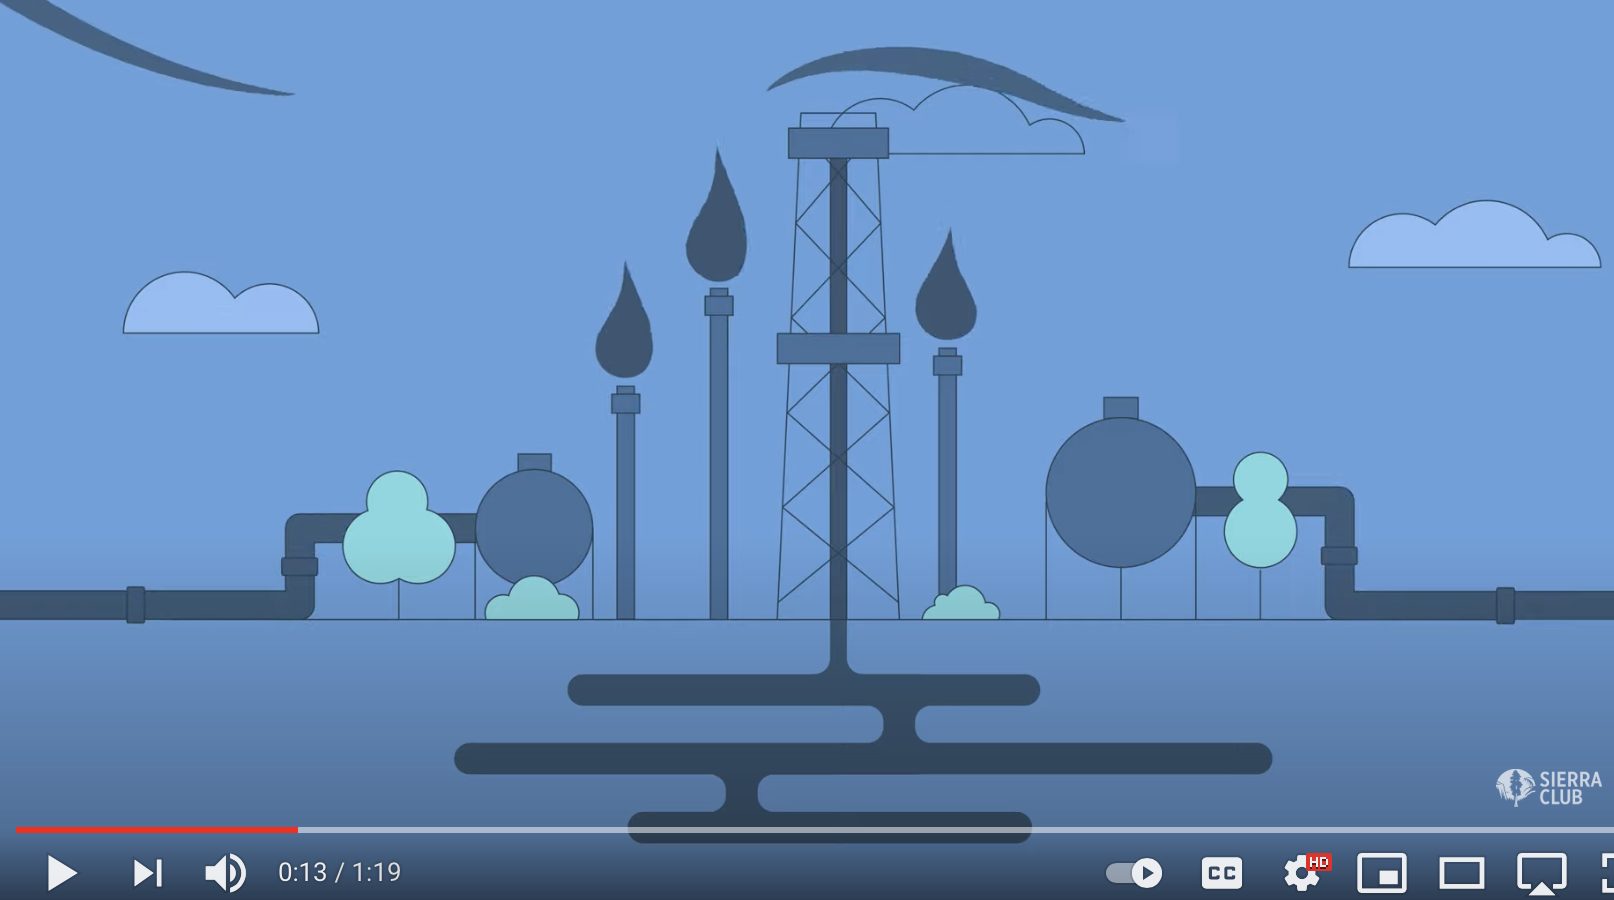 VIDEO: Fracking Harms Permian Basin and Gulf Coast Communities